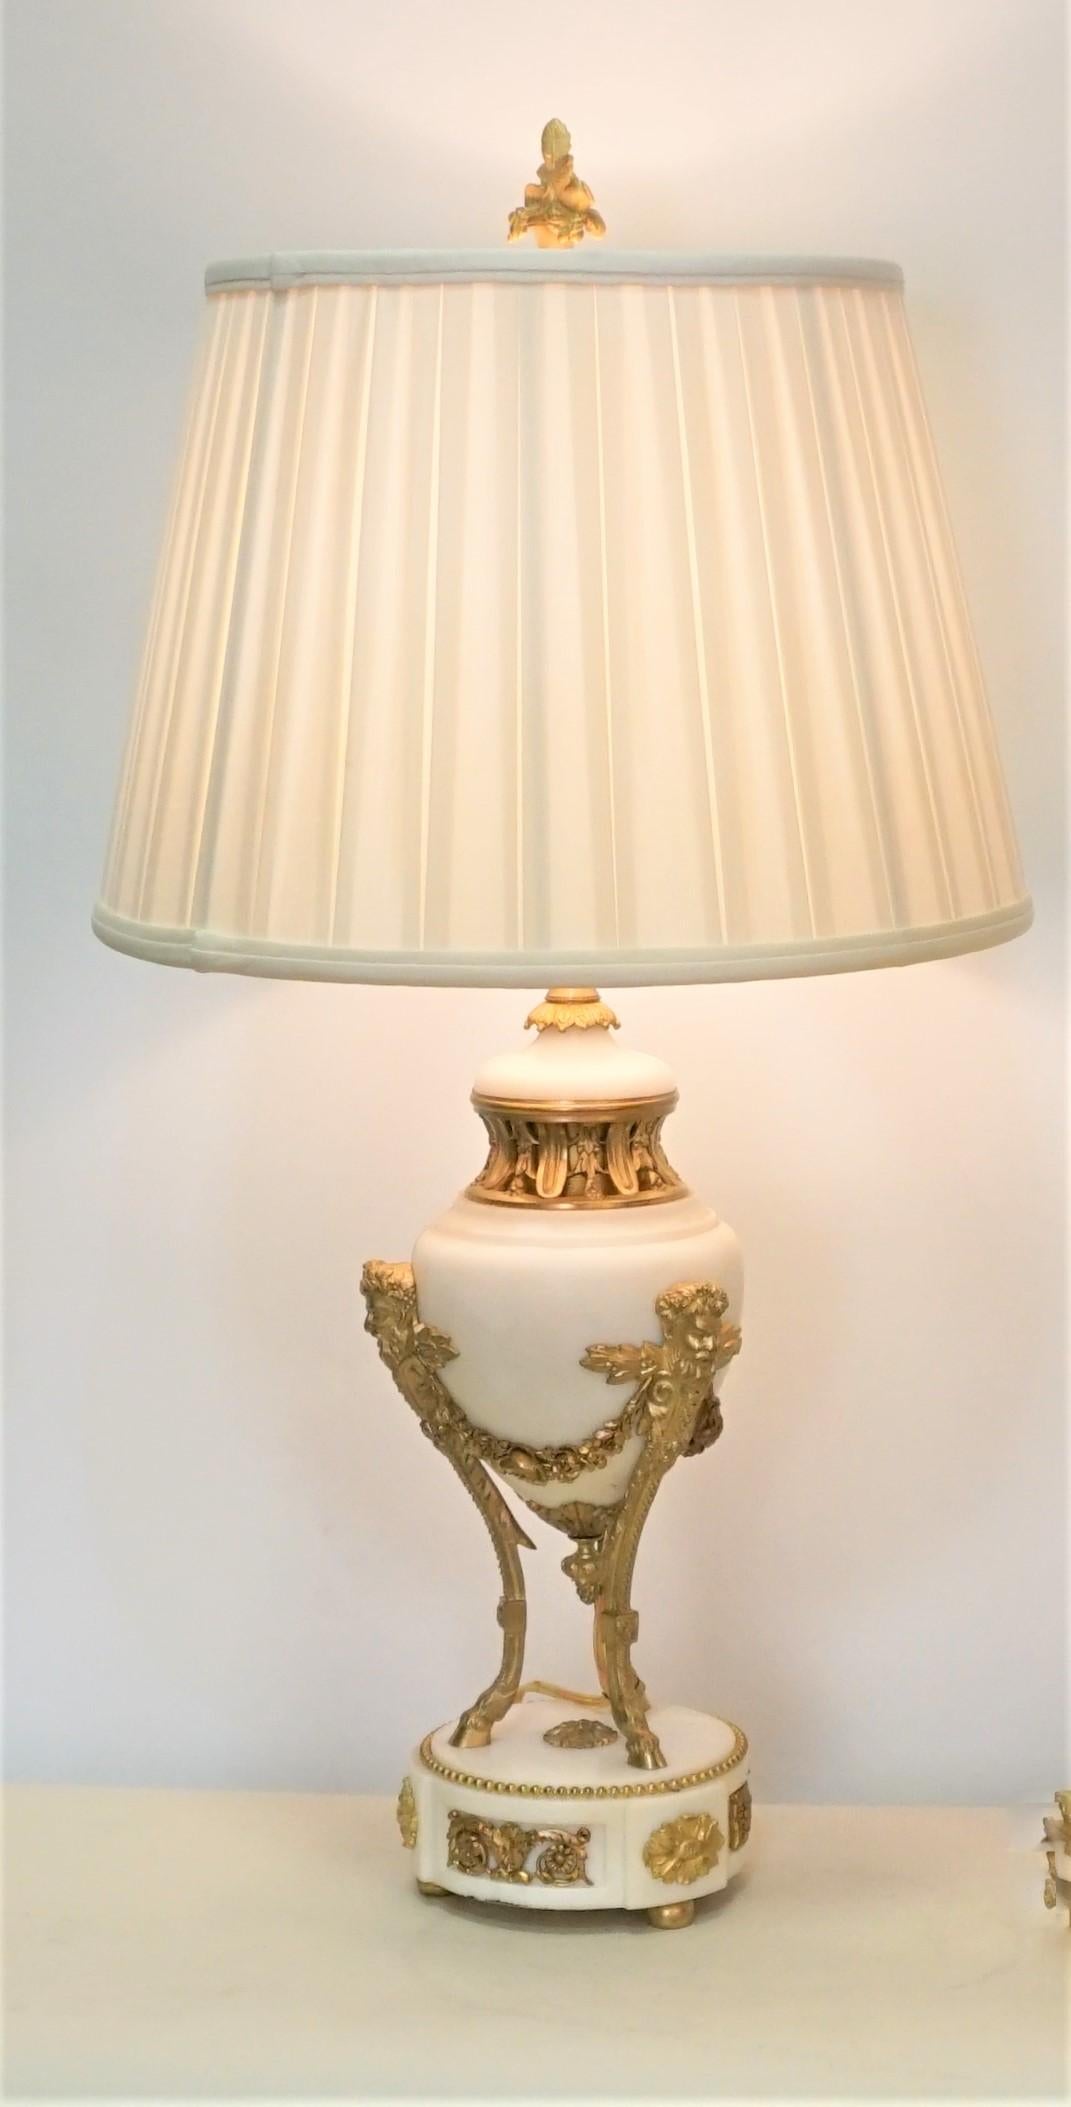 Pair of 19th century gilt bronze and white marble urns that have been electrified.
Fitted with silk box pleat lampshades.